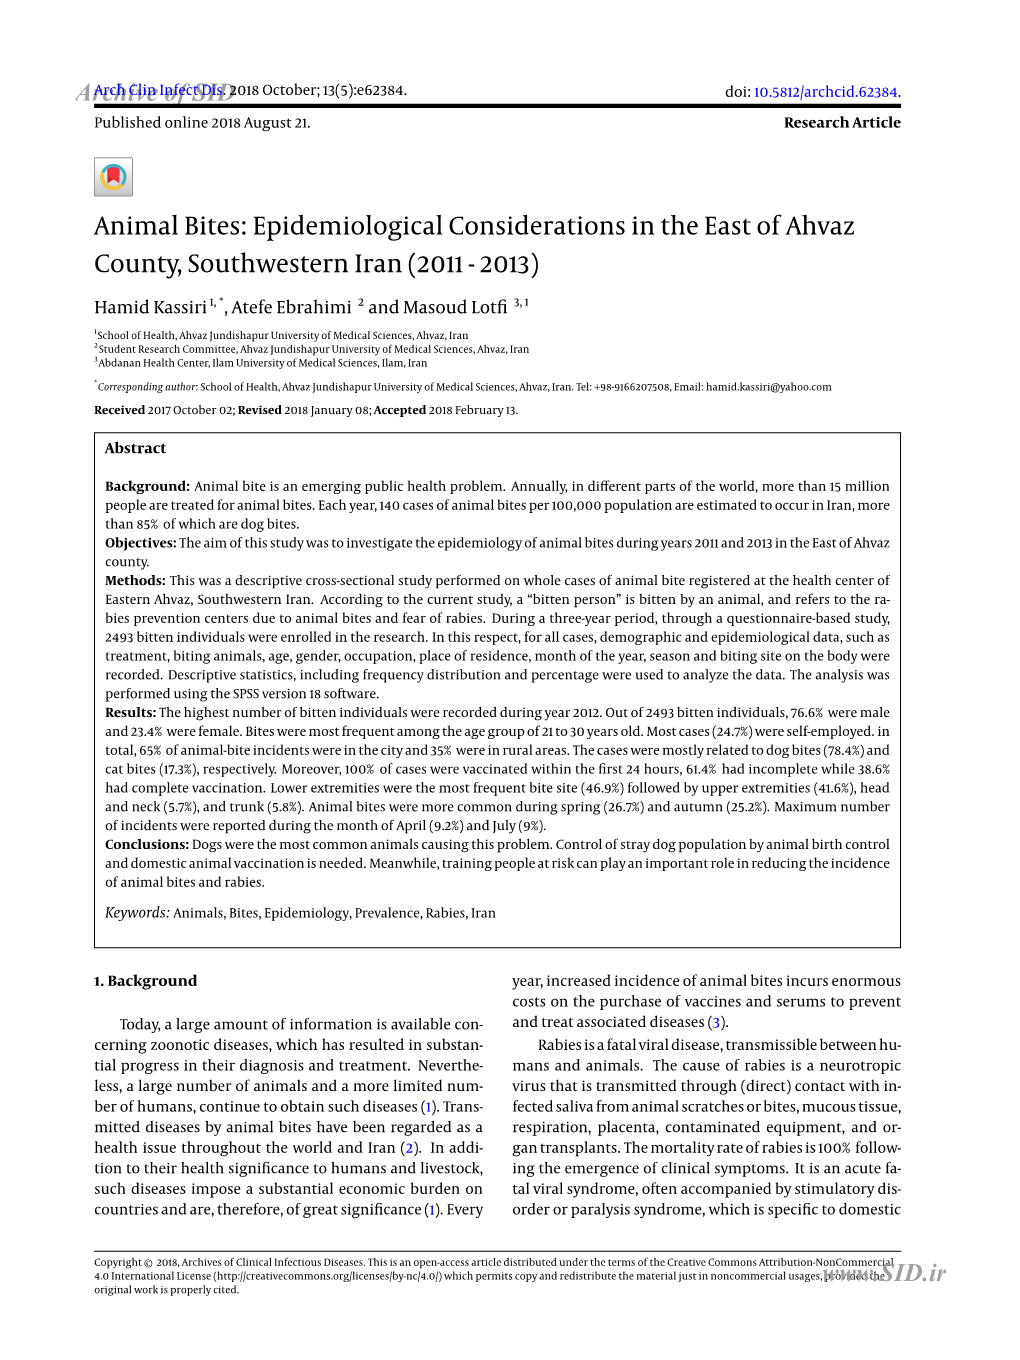 Animal Bites: Epidemiological Considerations in the East of Ahvaz County, Southwestern Iran (2011 - 2013)